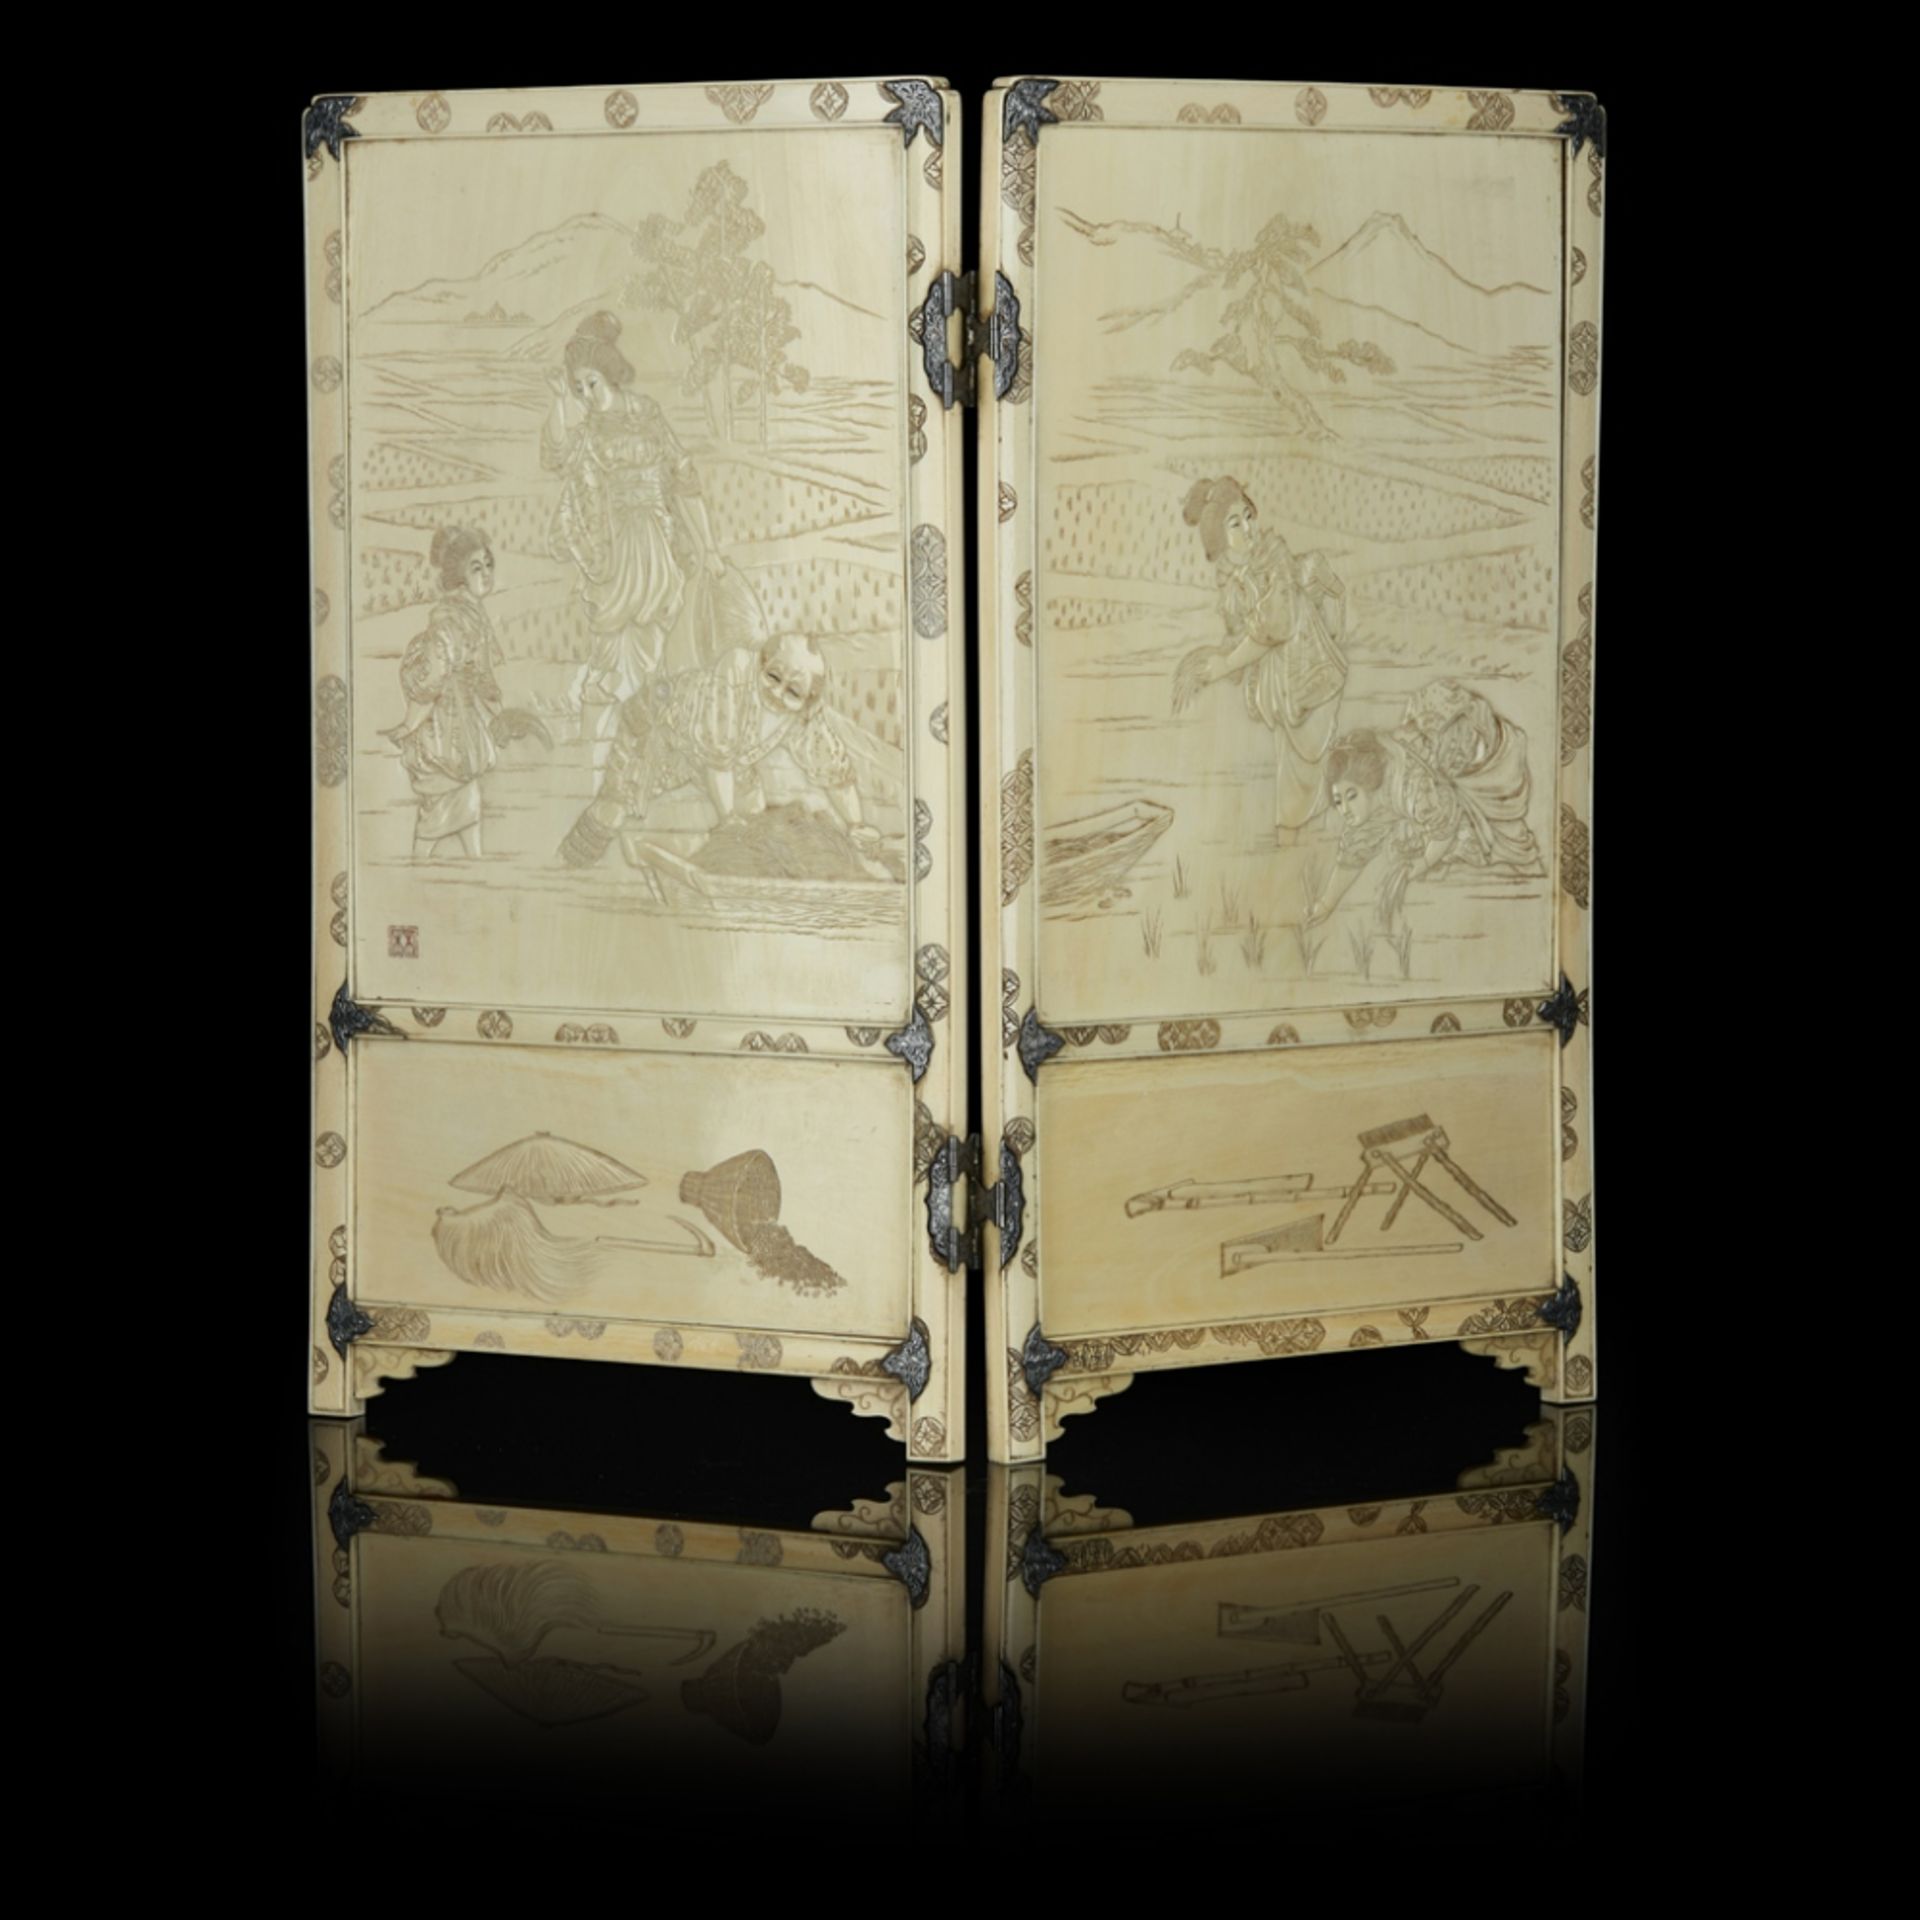 FINE SHIBAYAMA-INLAID IVORY TWO-FOLD SCREENMEIJI PERIOD each fold inlaid in mother-of-pearl, - Image 2 of 2